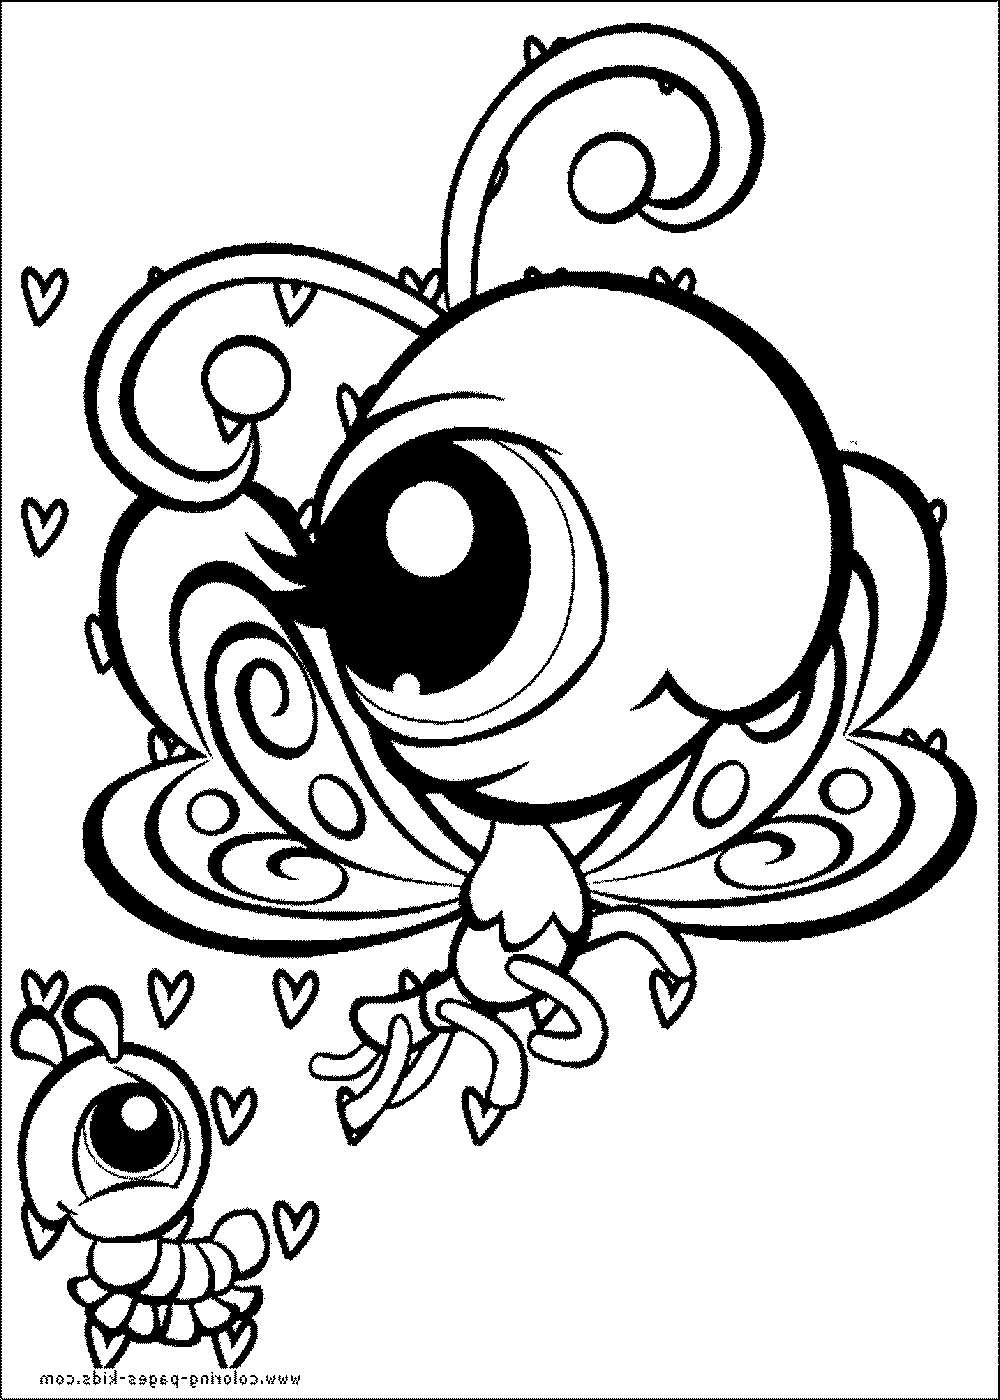 Free Printable Littlest Pet Shop Coloring Pages - Coloring ...